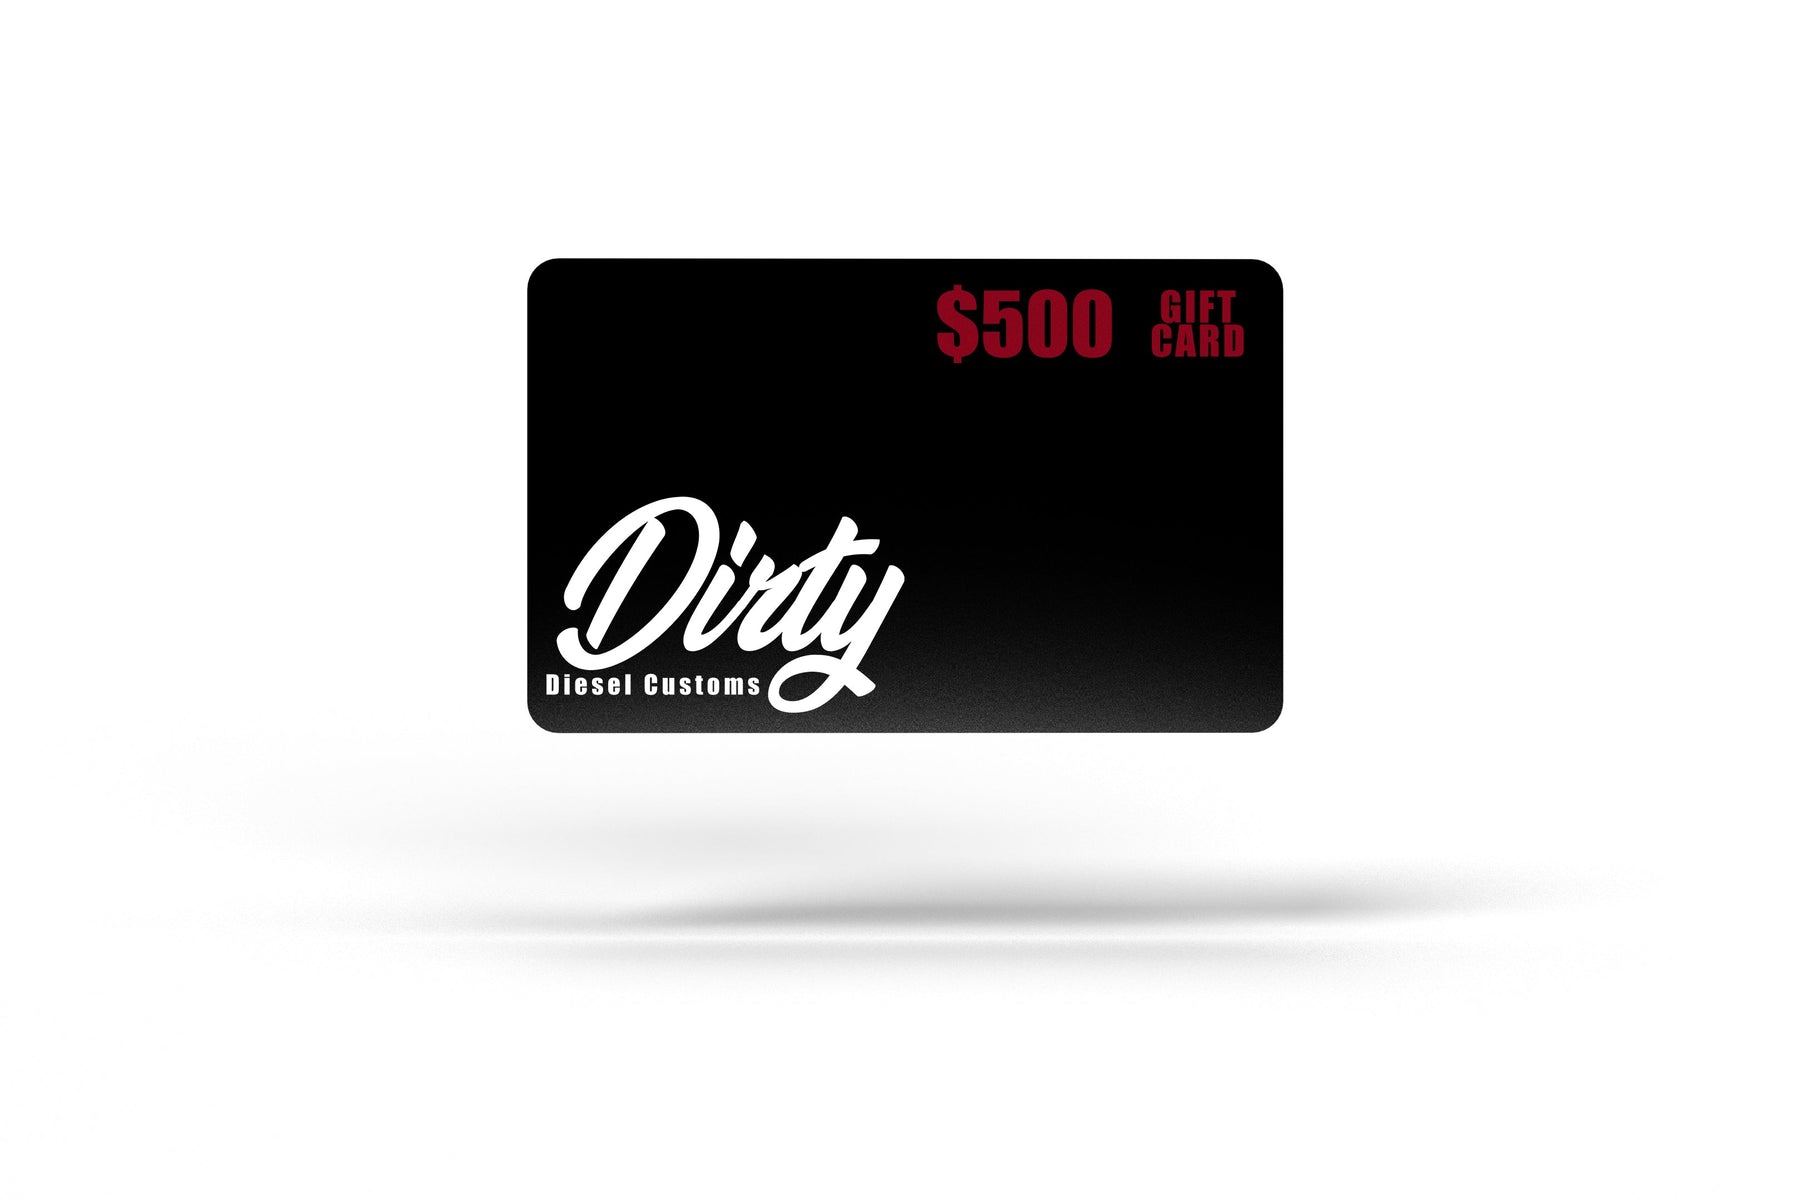 Dirty Diesel Customs Gift Card-Gift Cards-Dirty Diesel Customs-DDC-GC-500-Dirty Diesel Customs